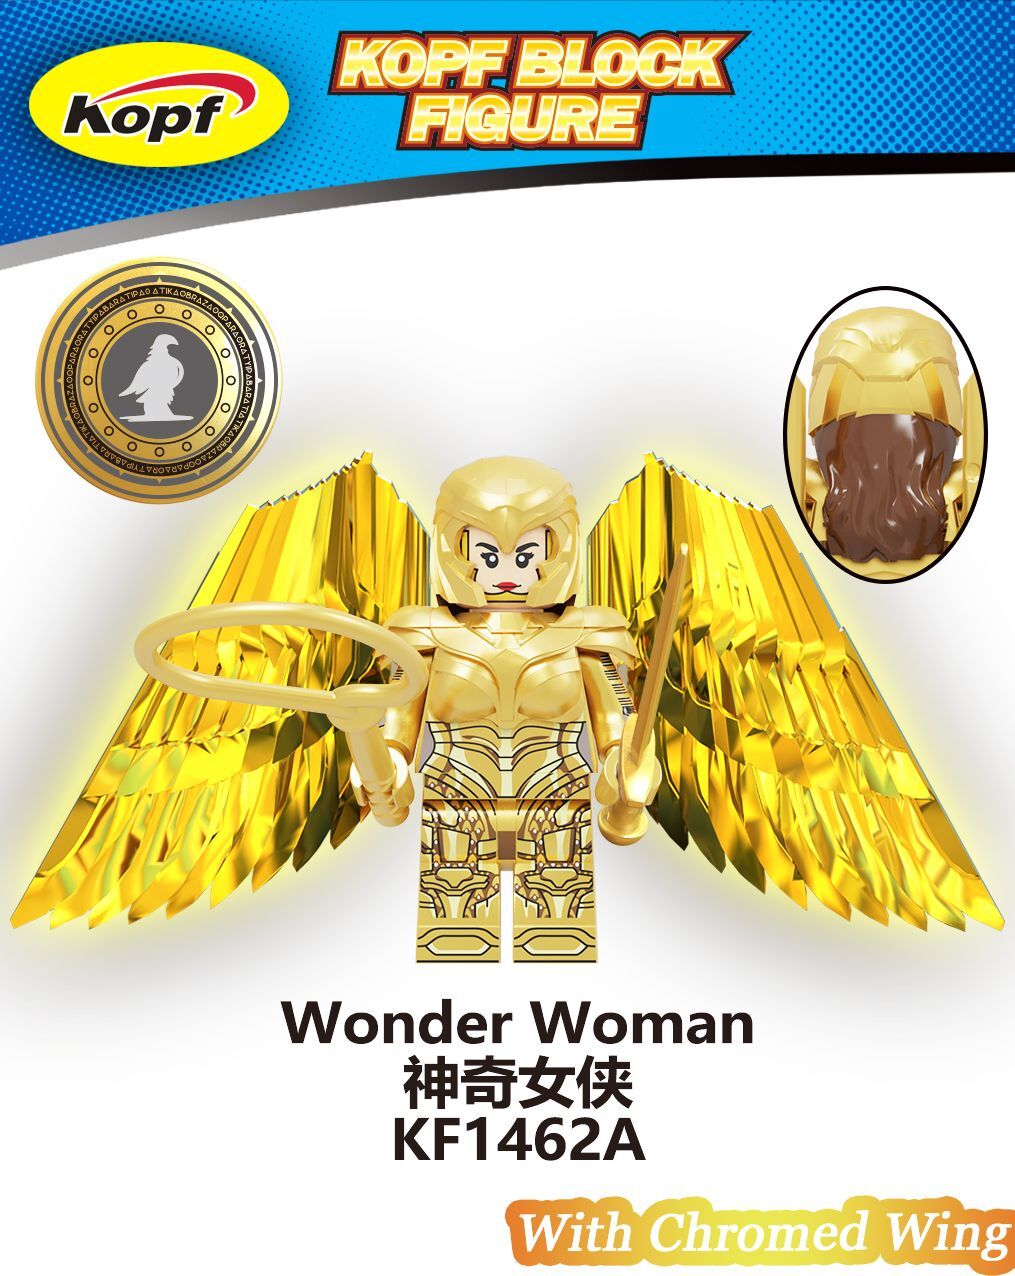 KF1462 KF1462A WM2043 76157 New Popular Games Wonder Woman Figures With Chromed Wing Building Blocks Cartoon Brick Toys Christmas Gift For Kid 